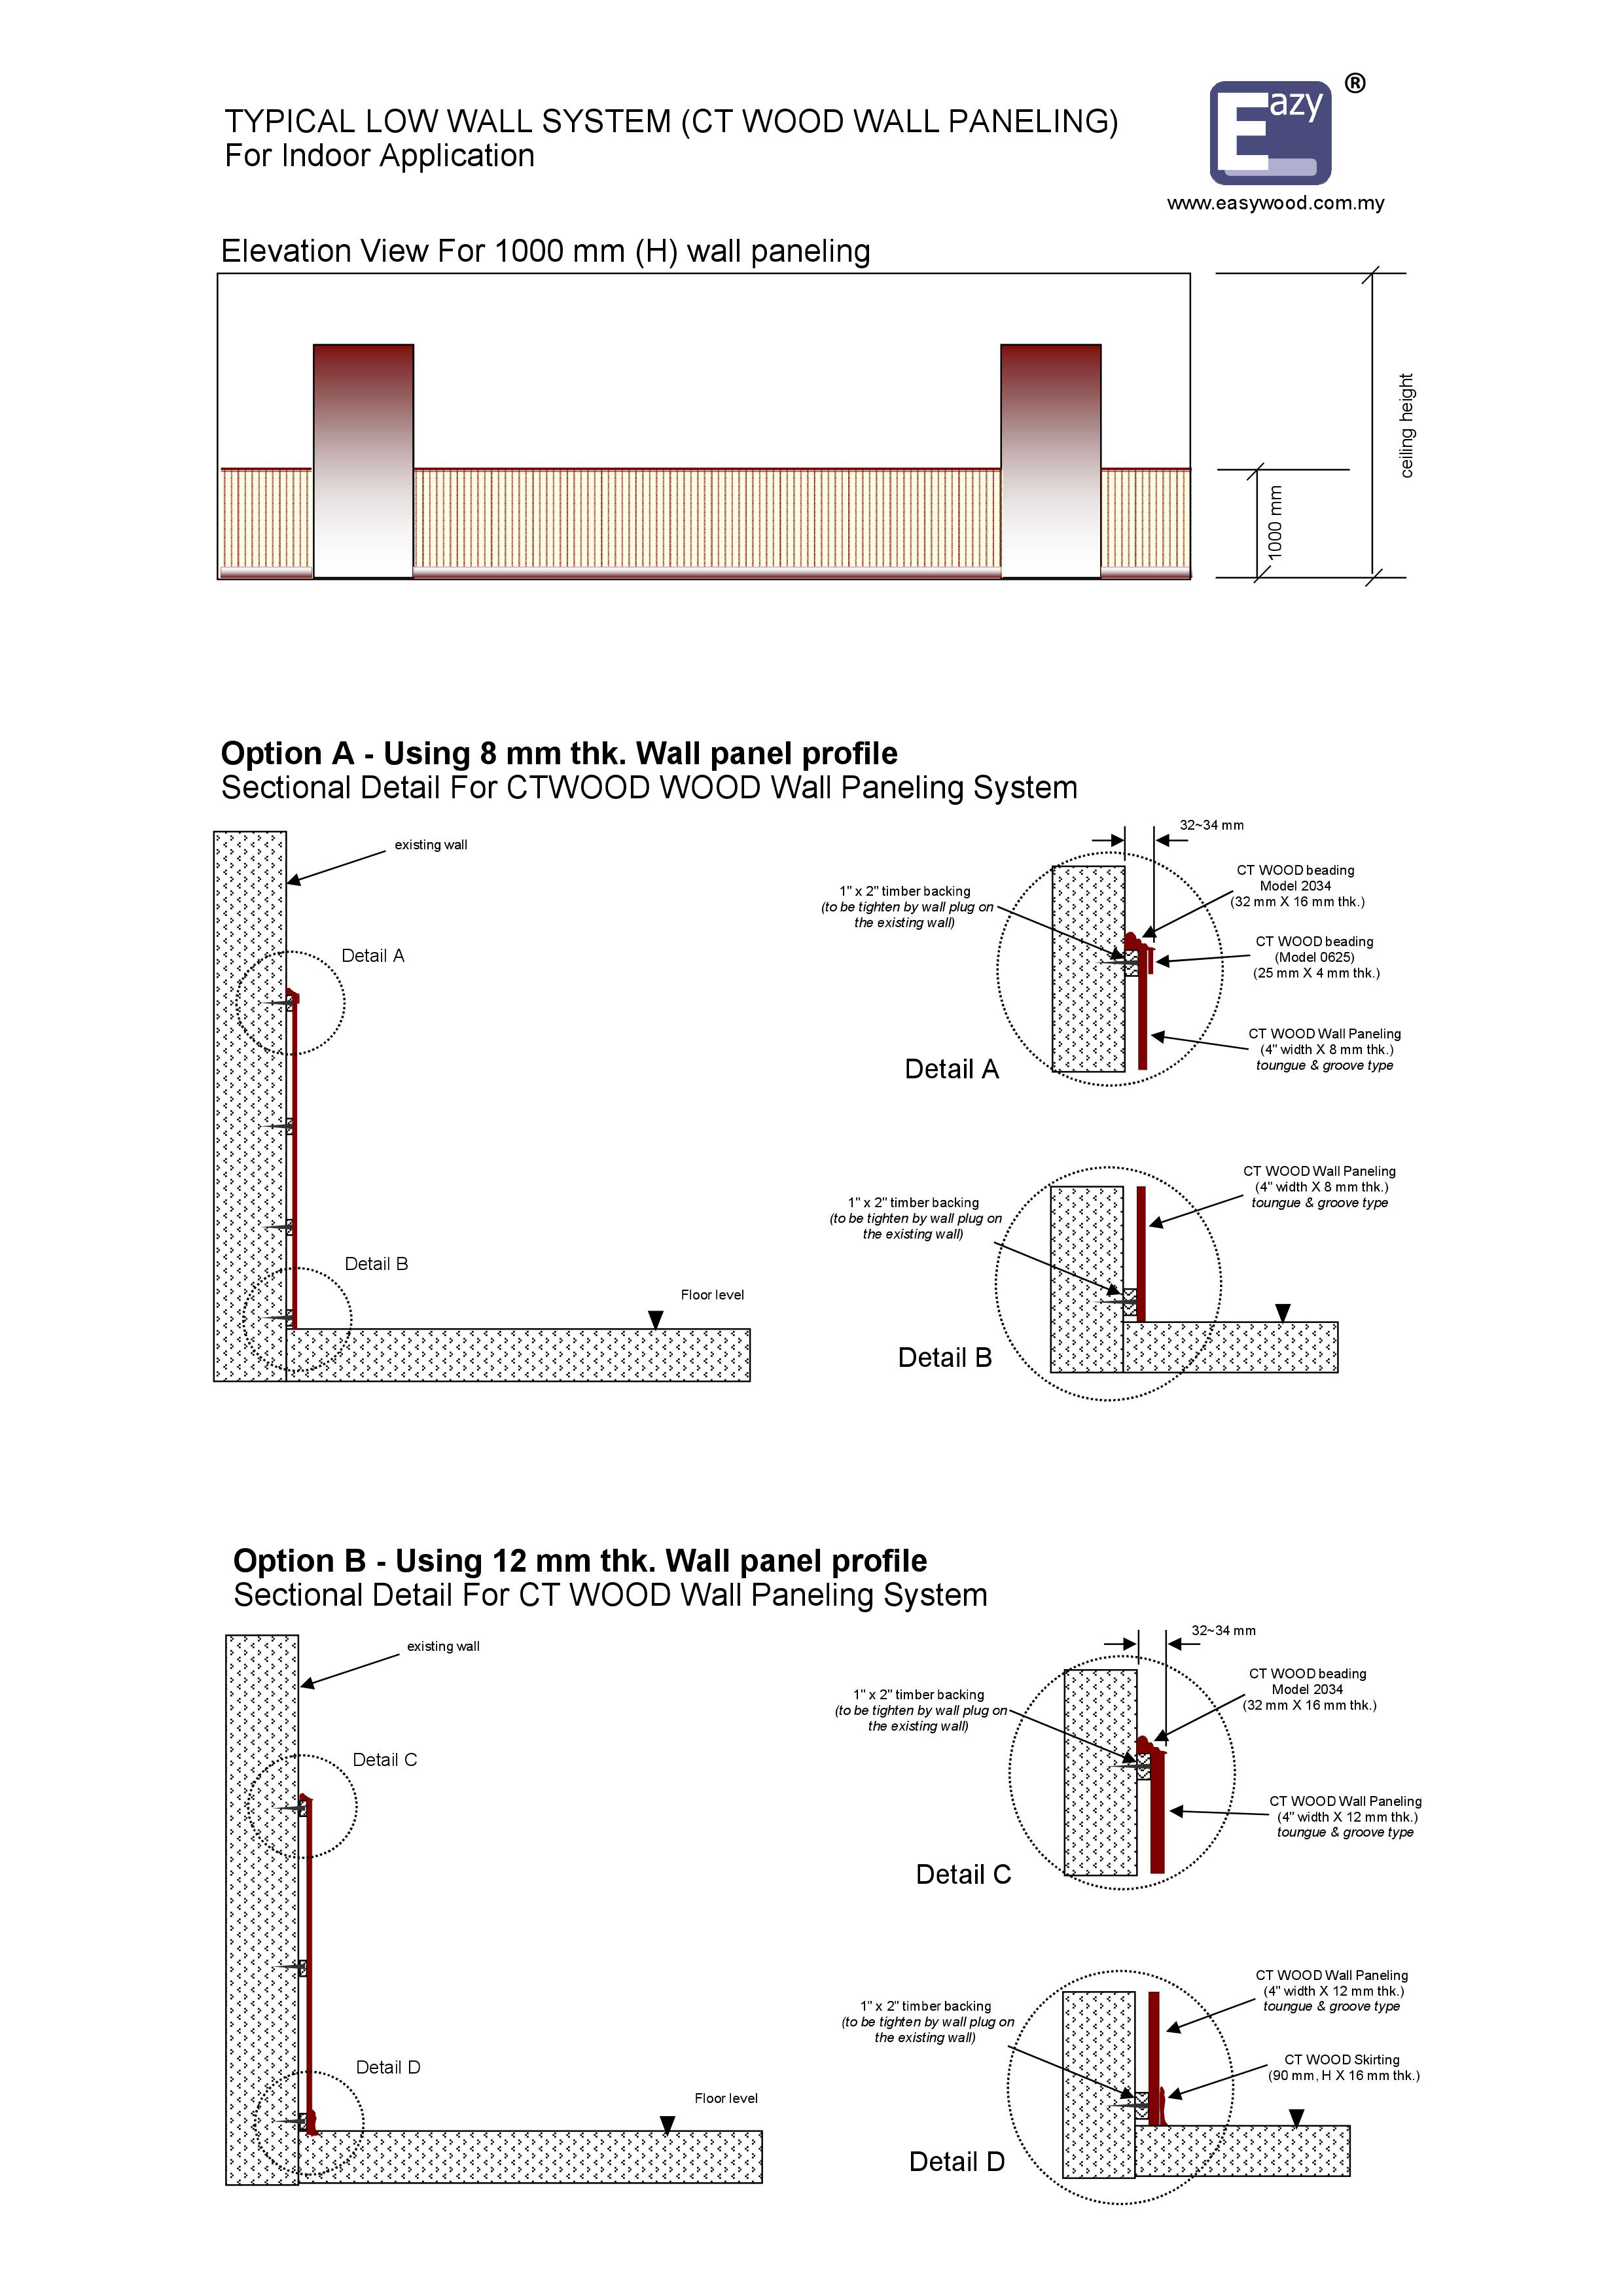 EAZYWOOD WALL PANELING INSTALLATION GUIDE VERSION 2012